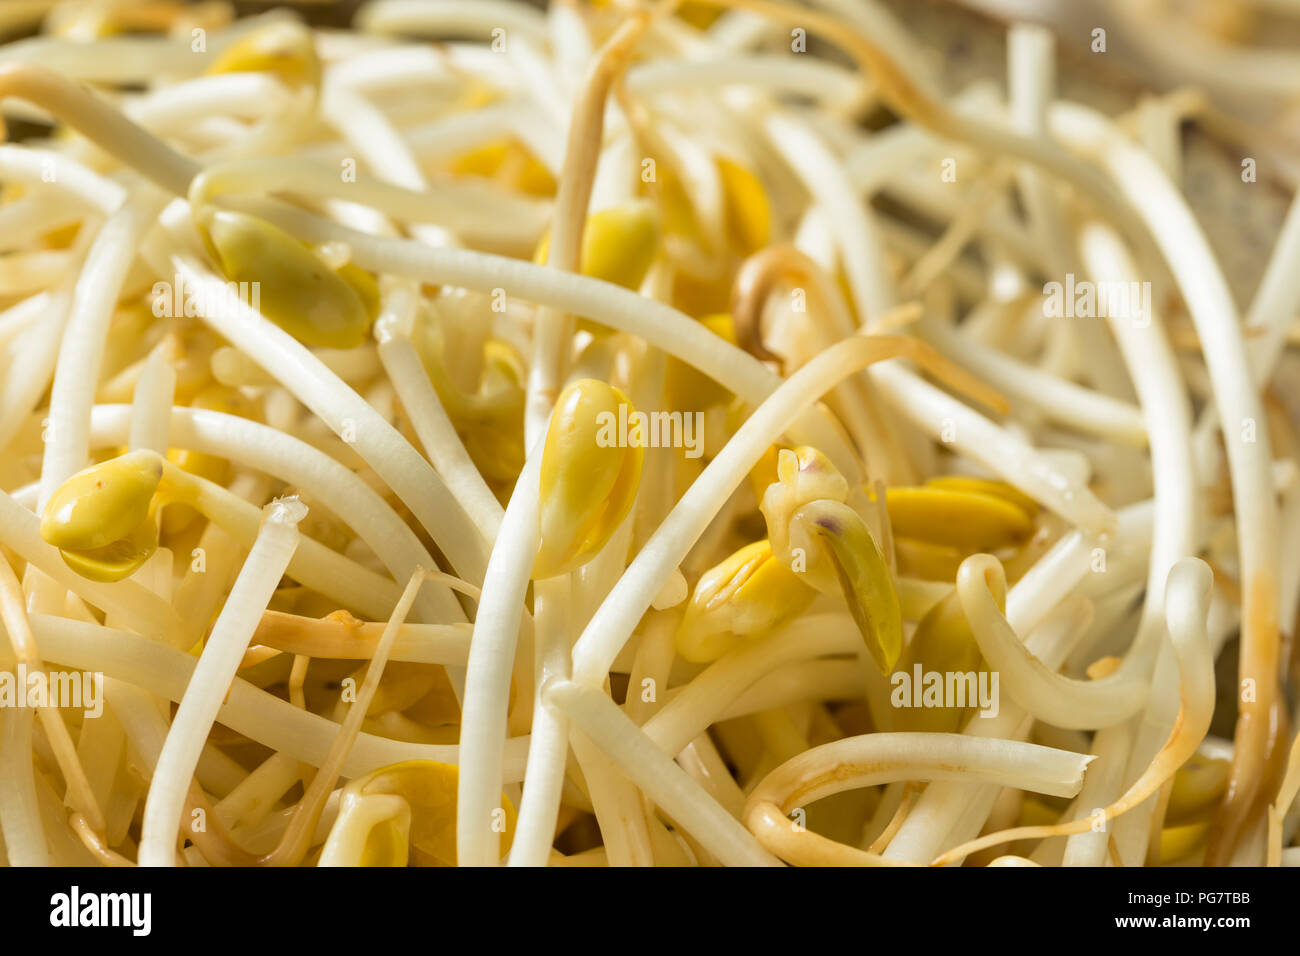 Raw Organic Soy Bean Sprouts in a Bowl Stock Photo